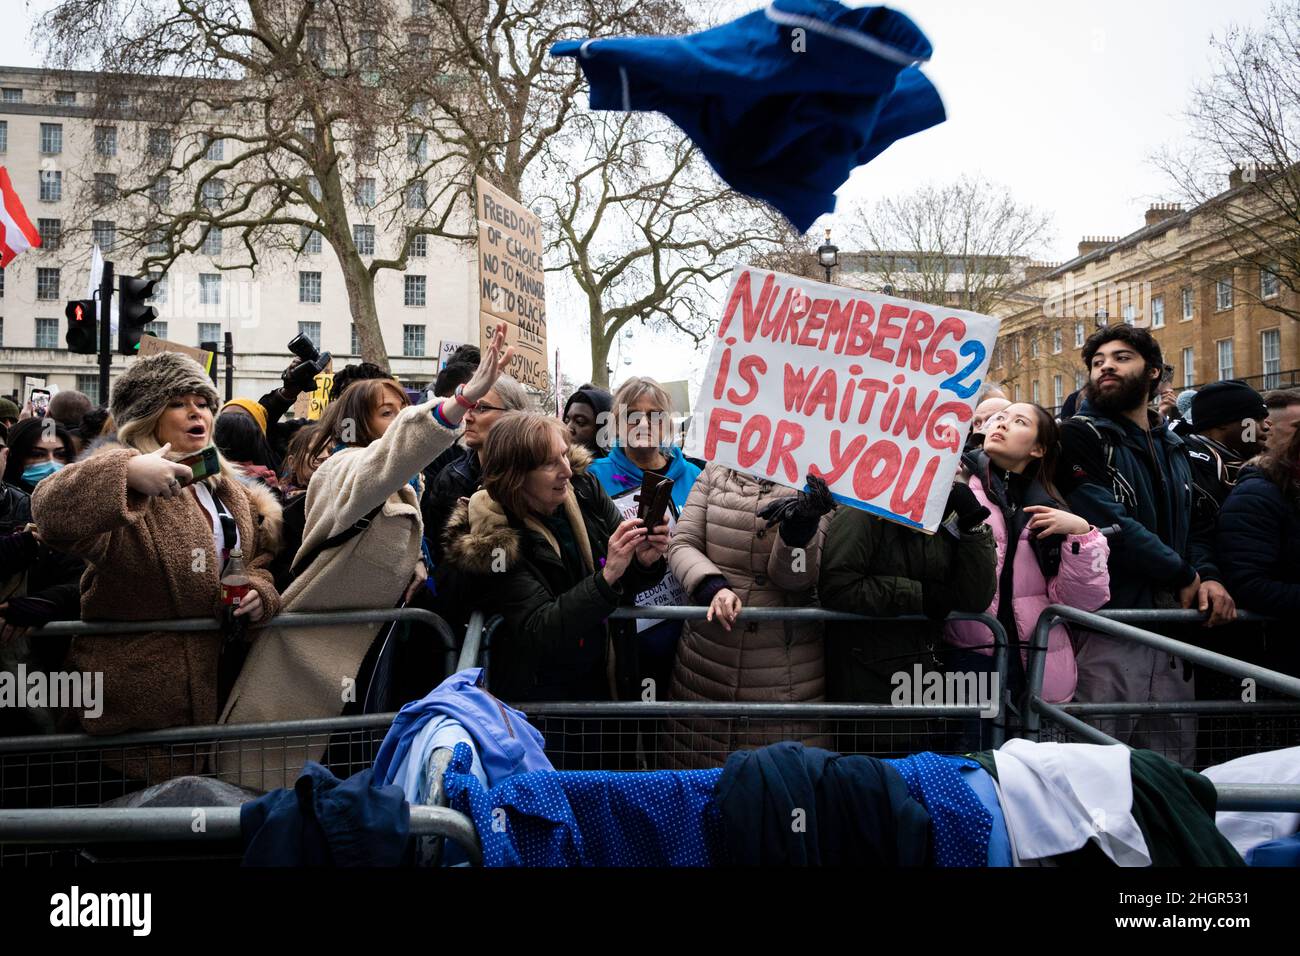 London, UK. 22nd Jan, 2022. Protesters throw NHS uniforms at Downing Street. As the mandate to get vaccinated against COVID-19 draws ever closer NHS workers join the protest. The anti-lockdown demonstration was organised by the World Wide Rally For Freedom movement. Credit: Andy Barton/Alamy Live News Stock Photo